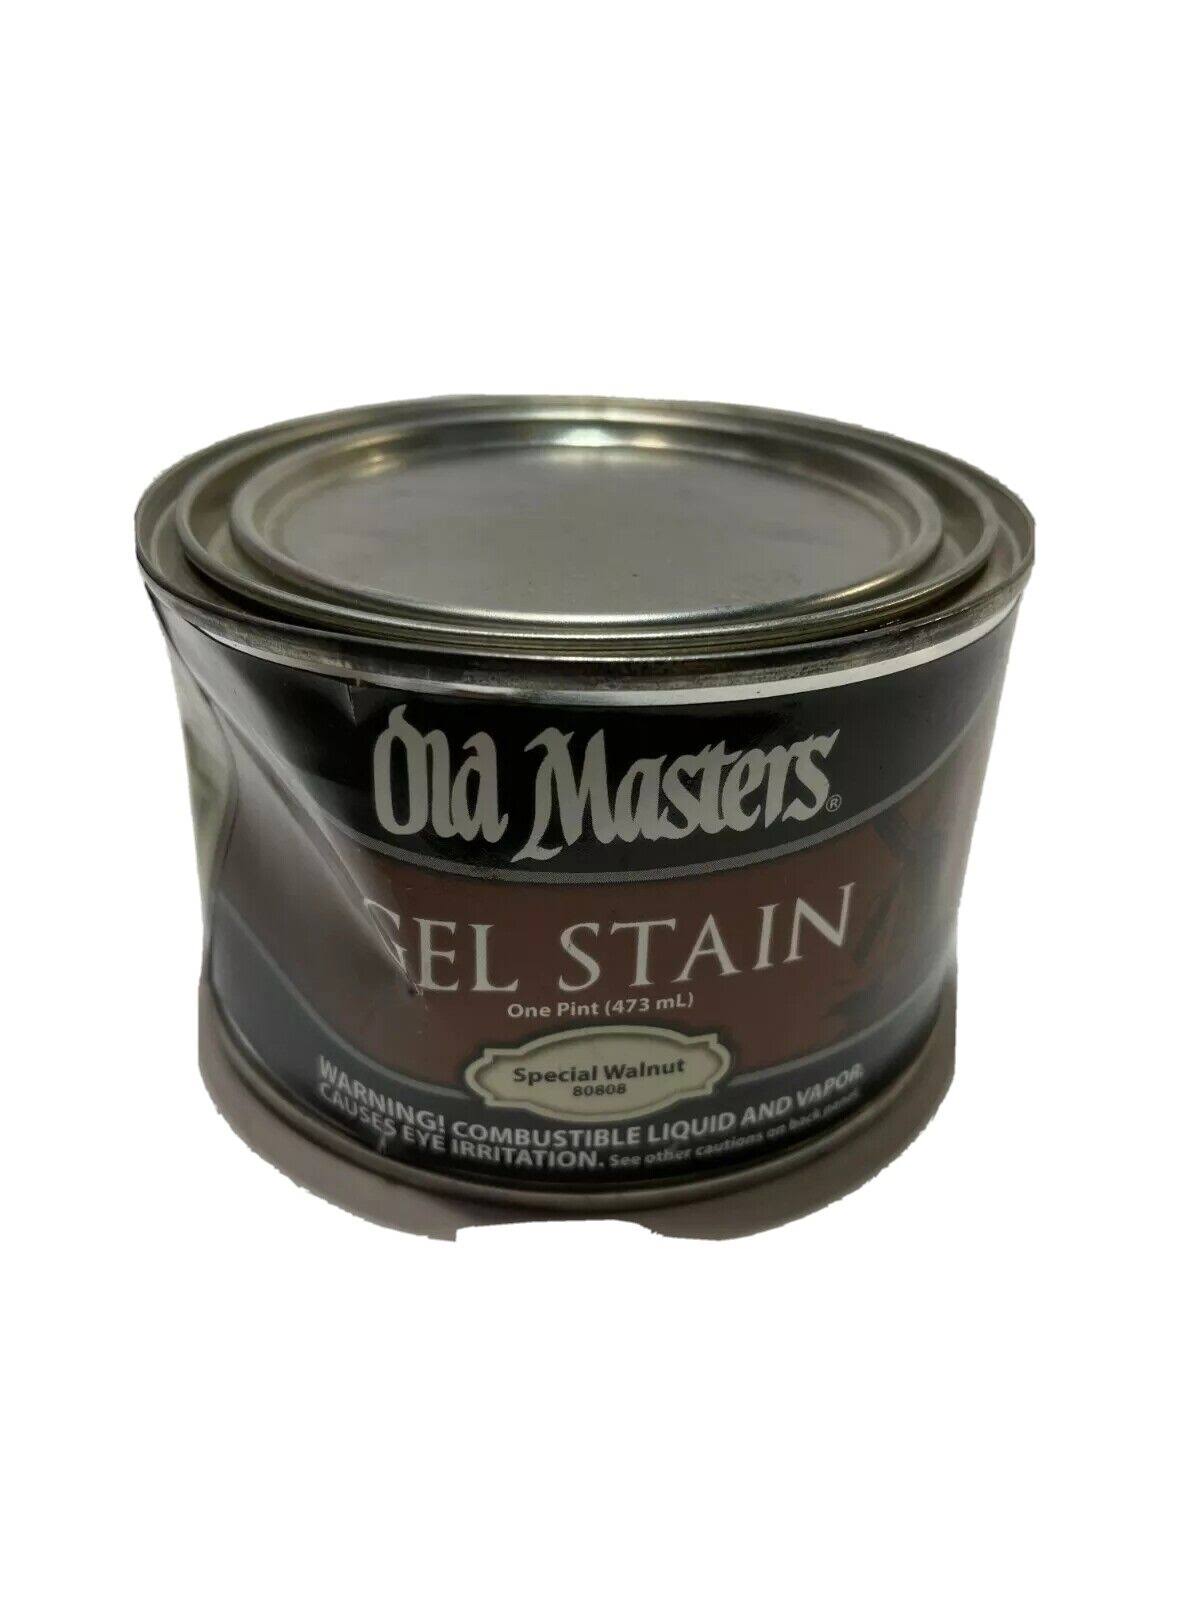 Old Masters 80808 PT Special Walnut Gel Stain